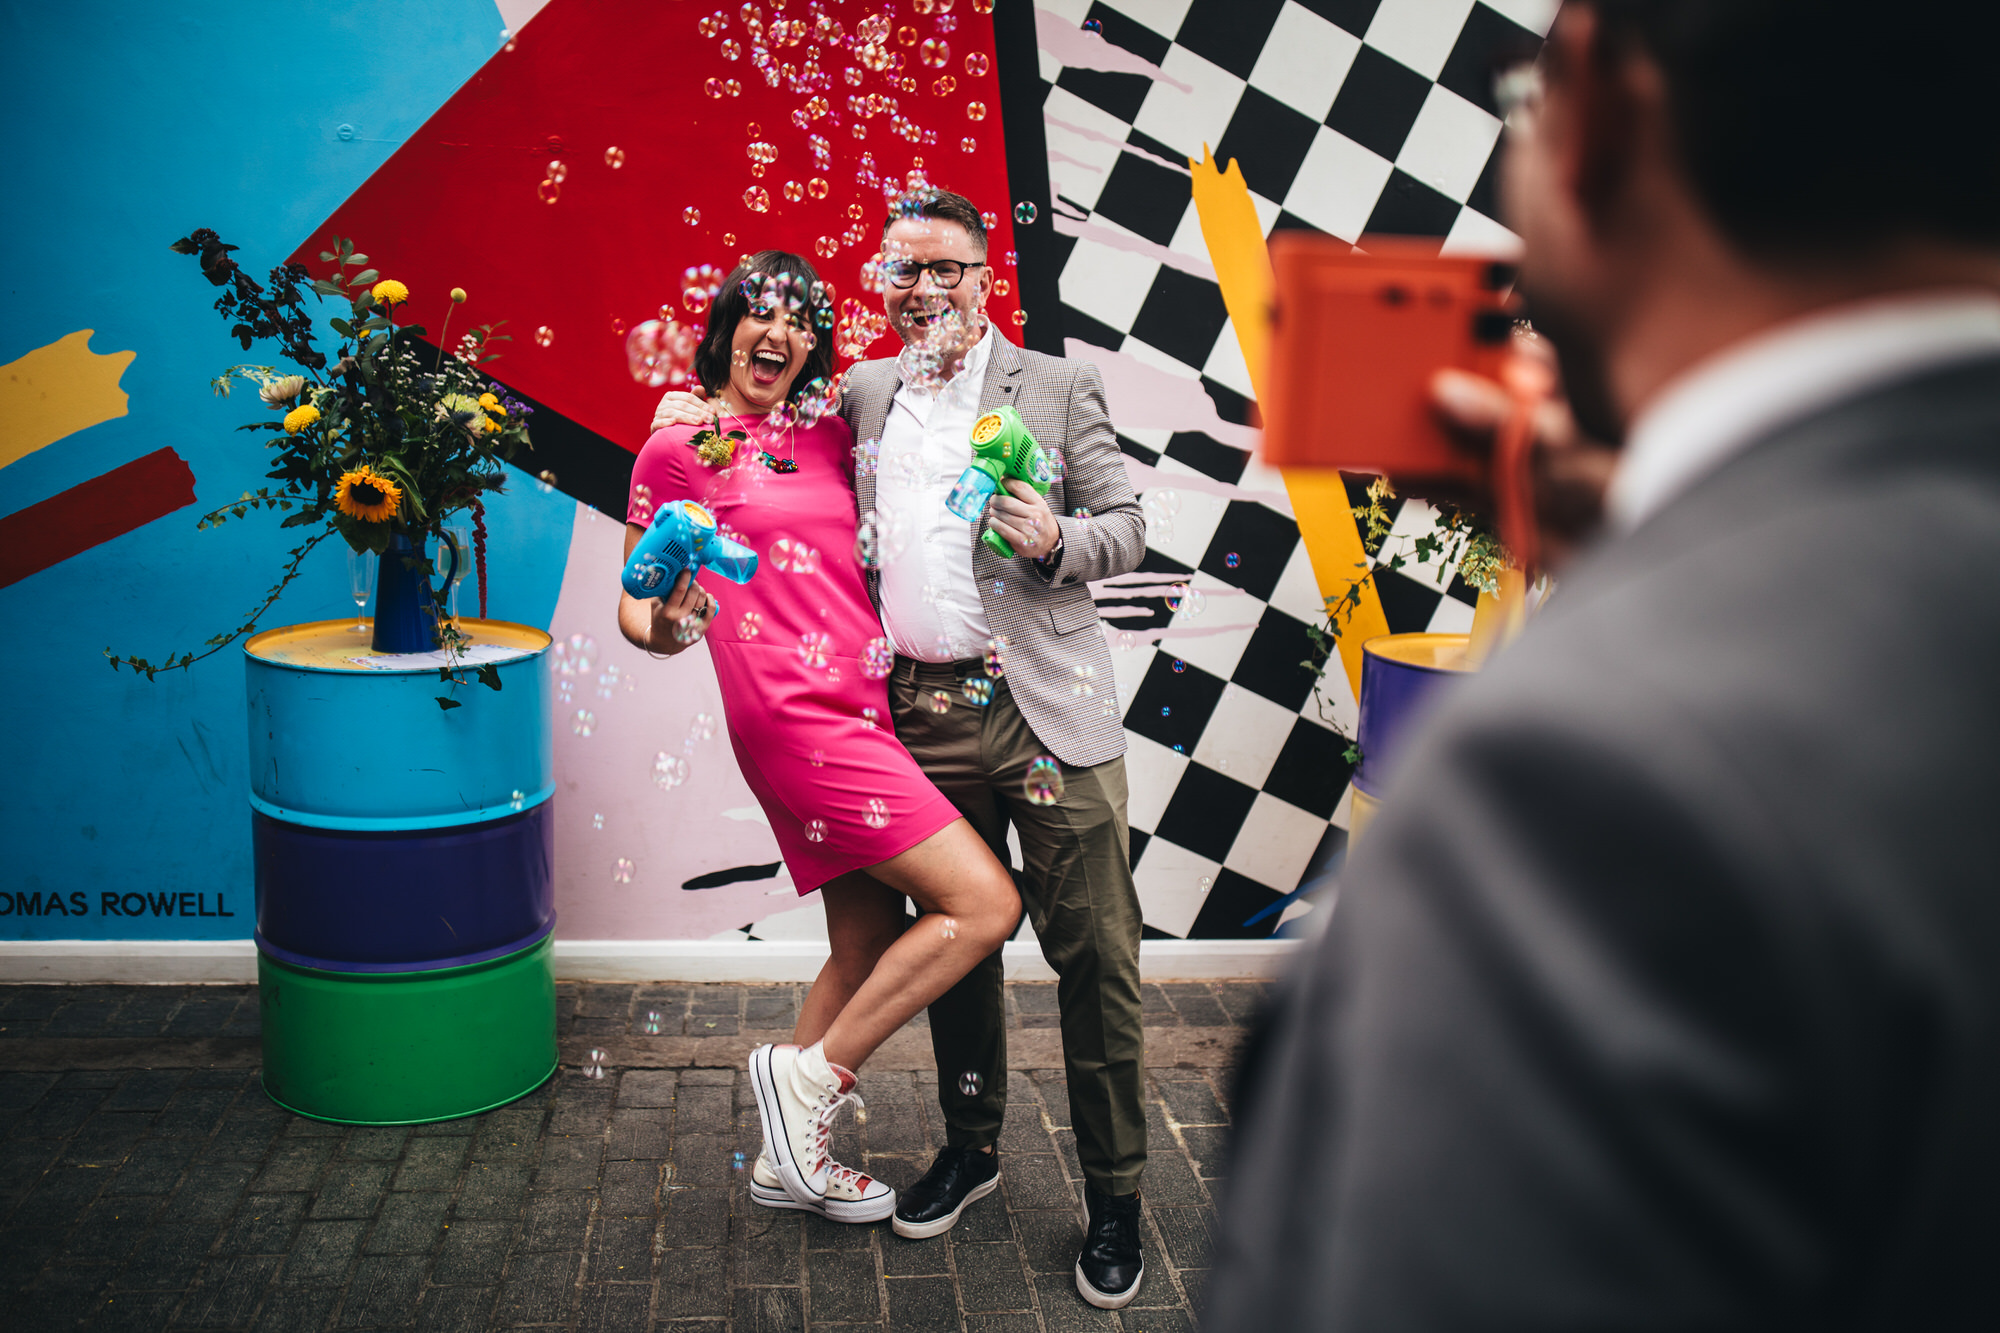 bridesmaid poses for photo with man in suit surrounded by bubbles